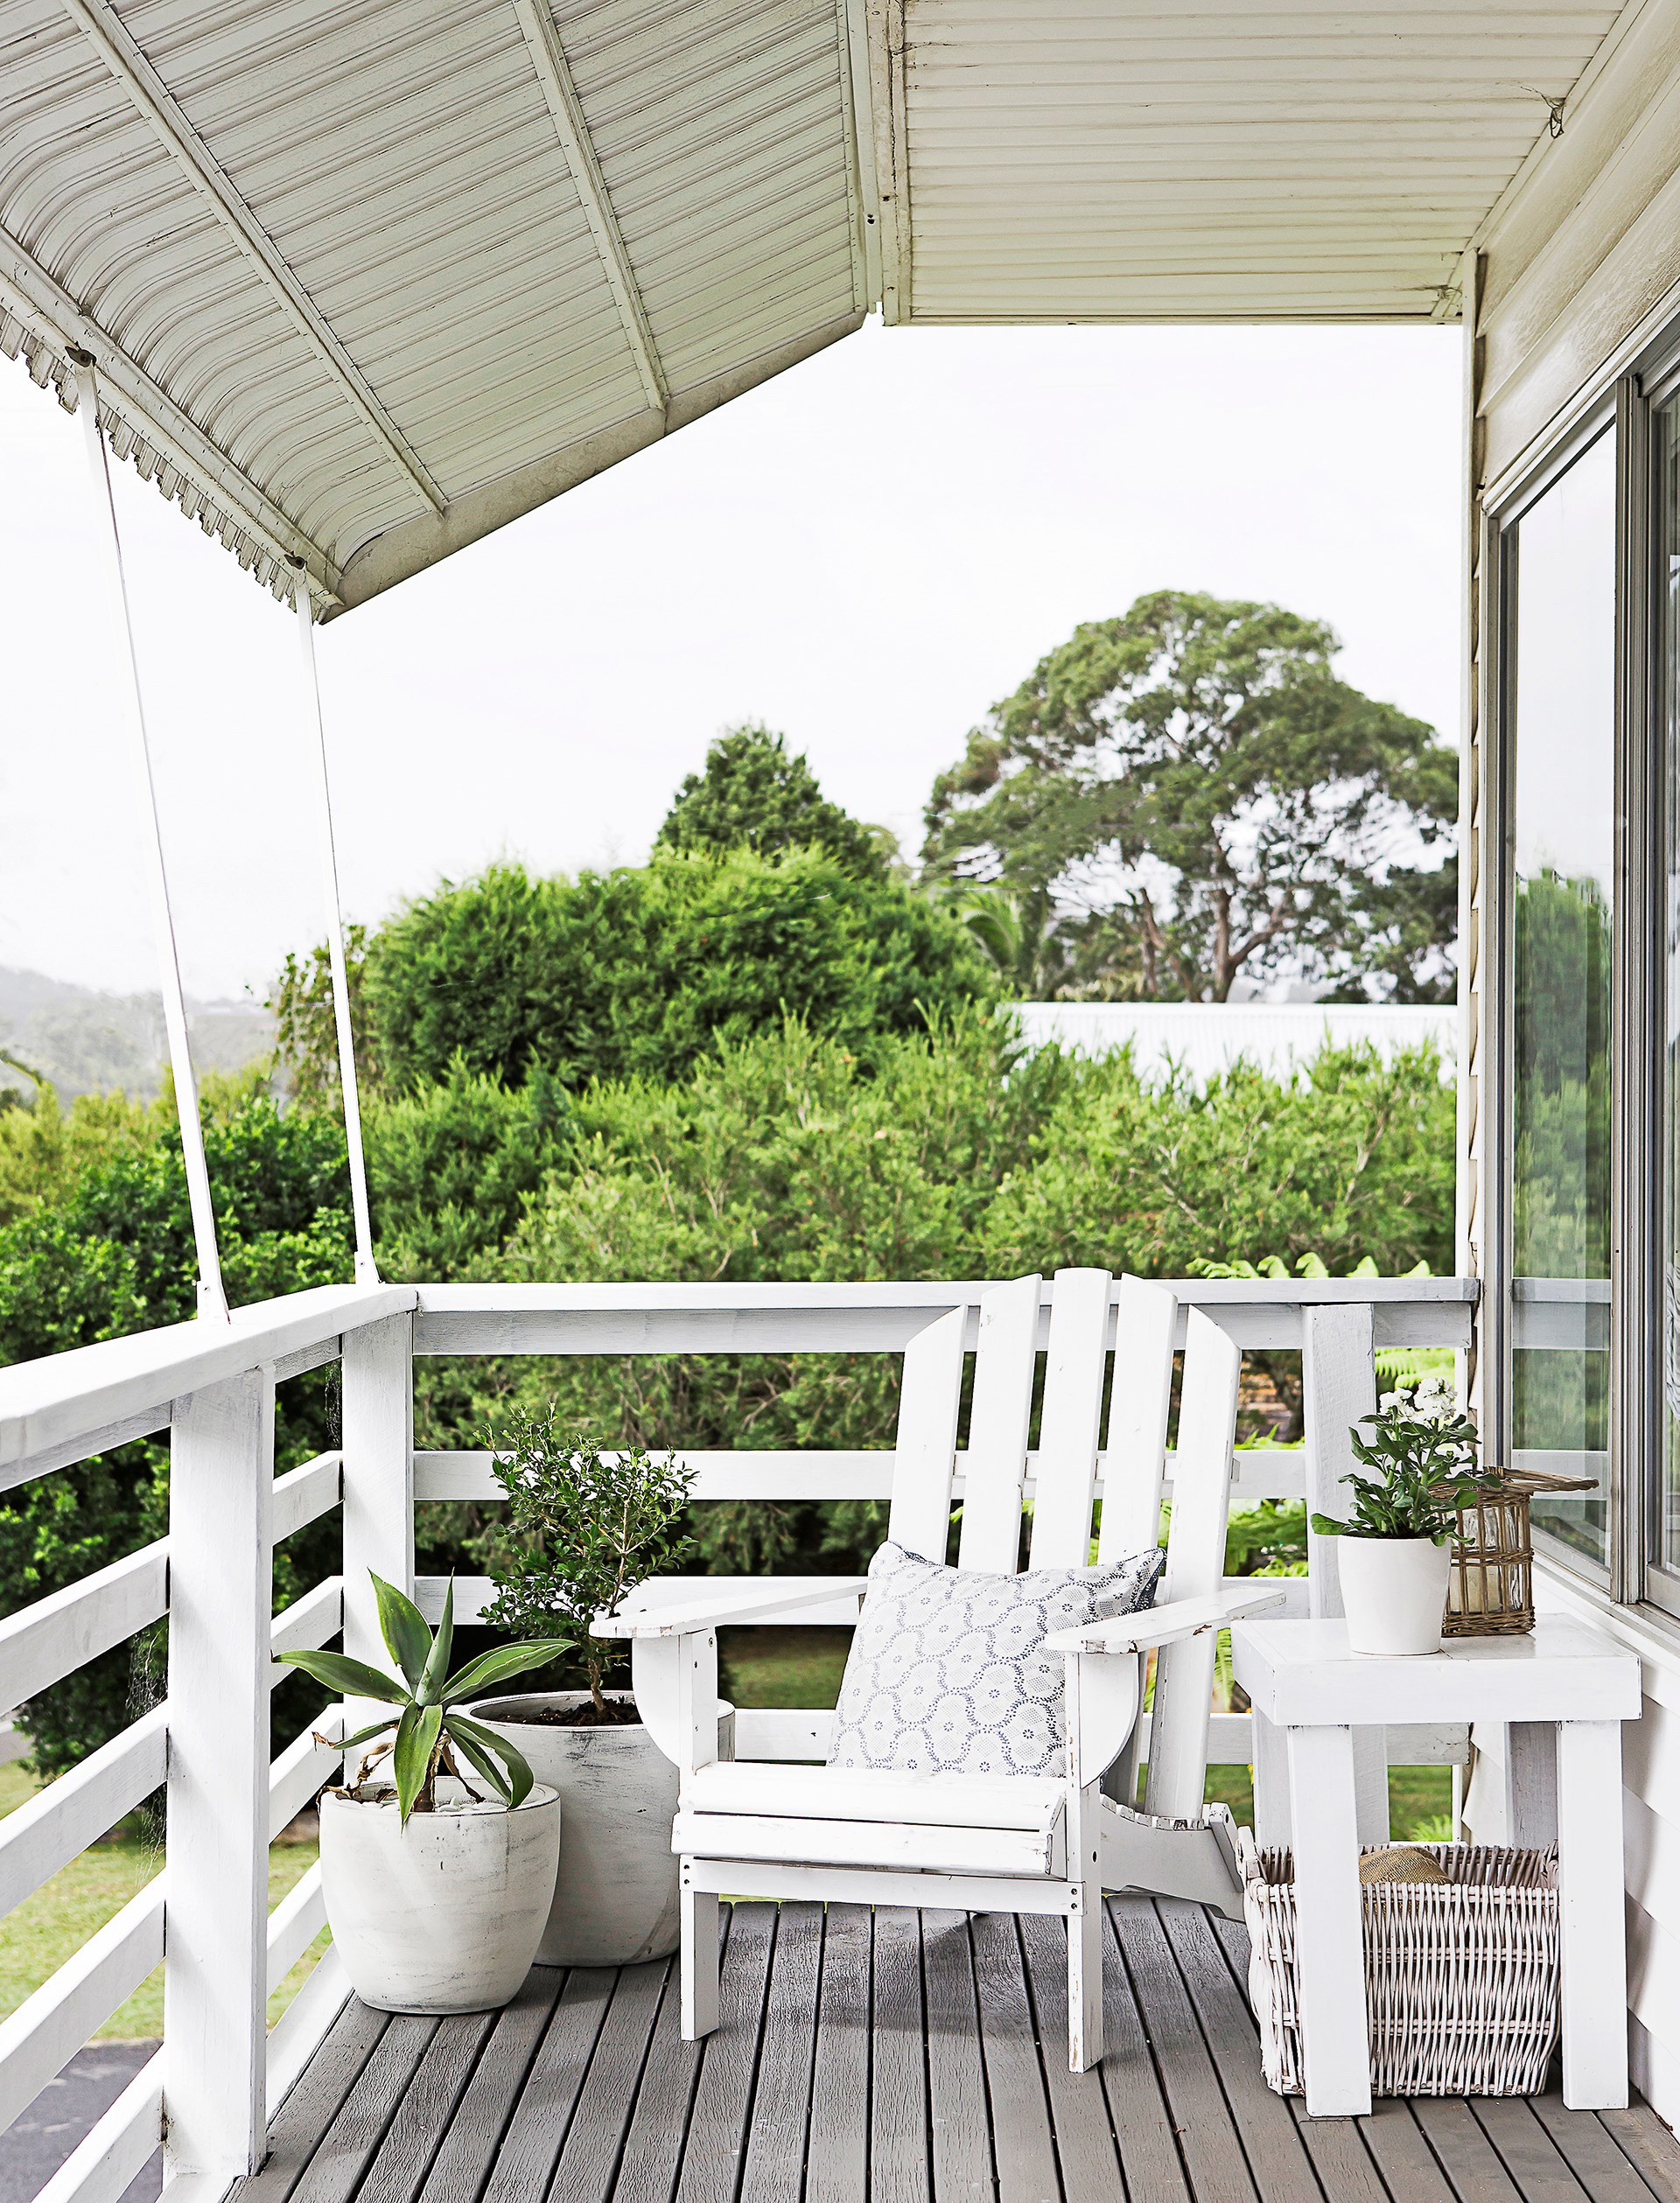 An old cod chair on the deck is in prime position for enjoying the ocean views this Central Coast home has to offer. Take a look inside this [cruisy coastal home](http://www.homestolove.com.au/gallery-stella-and-michaels-coastal-dream-comes-true-2621|target="_blank"). Photo: Maree Homer / *homes+*